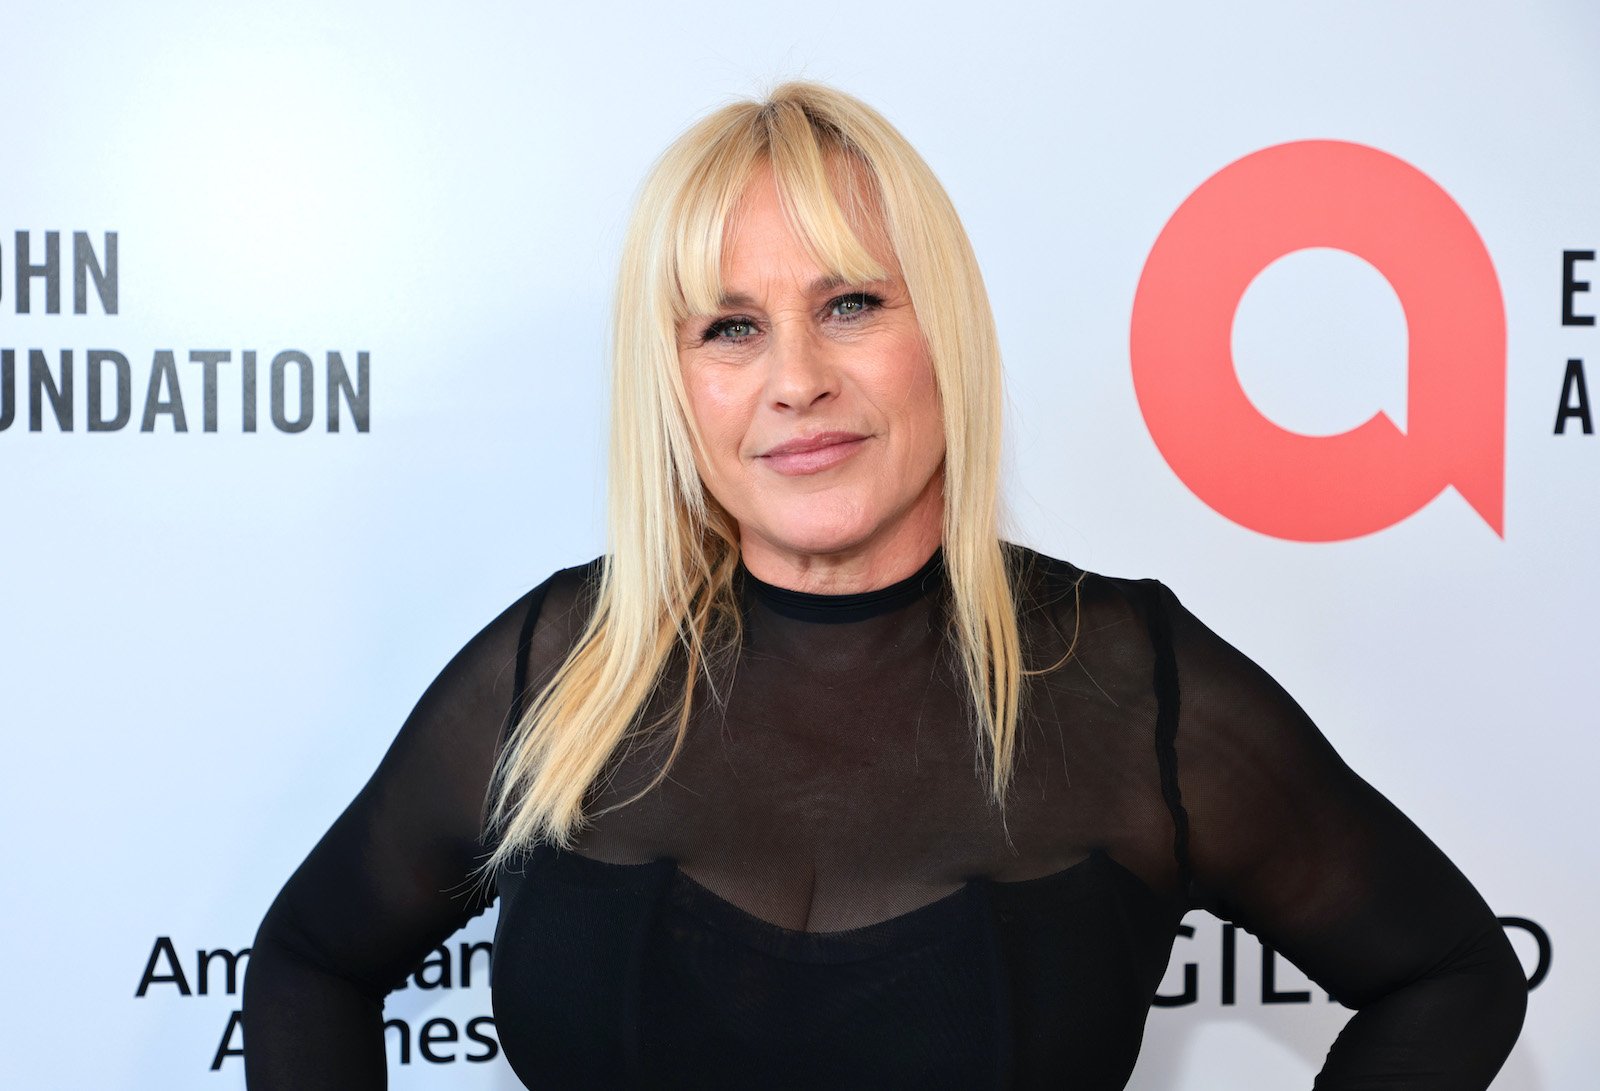 Patricia Arquette poses on the step and repeat at the Elton John AIDS Foundation's 30th Annual Academy Awards Viewing Party 